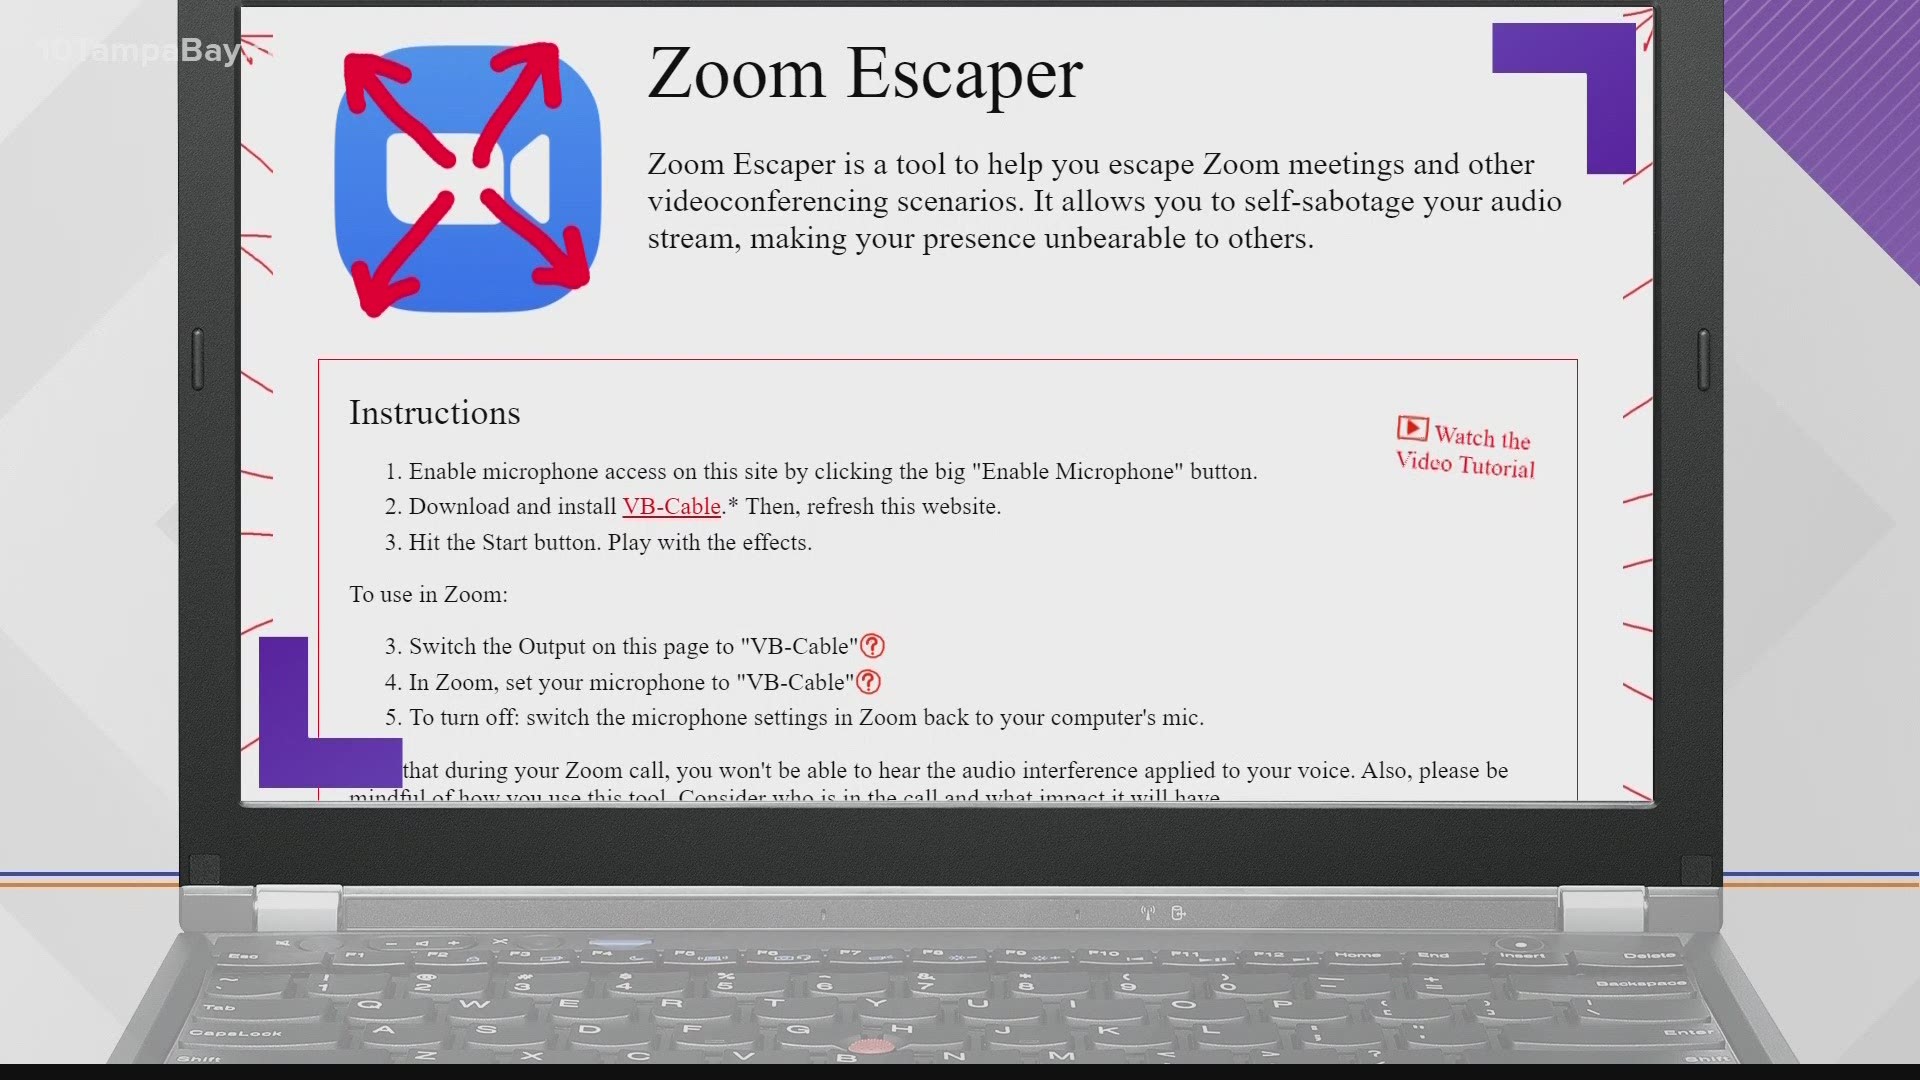 Zoom Escaper can help you get out of your meeting by playing sounds like a crying baby or a man weeping.